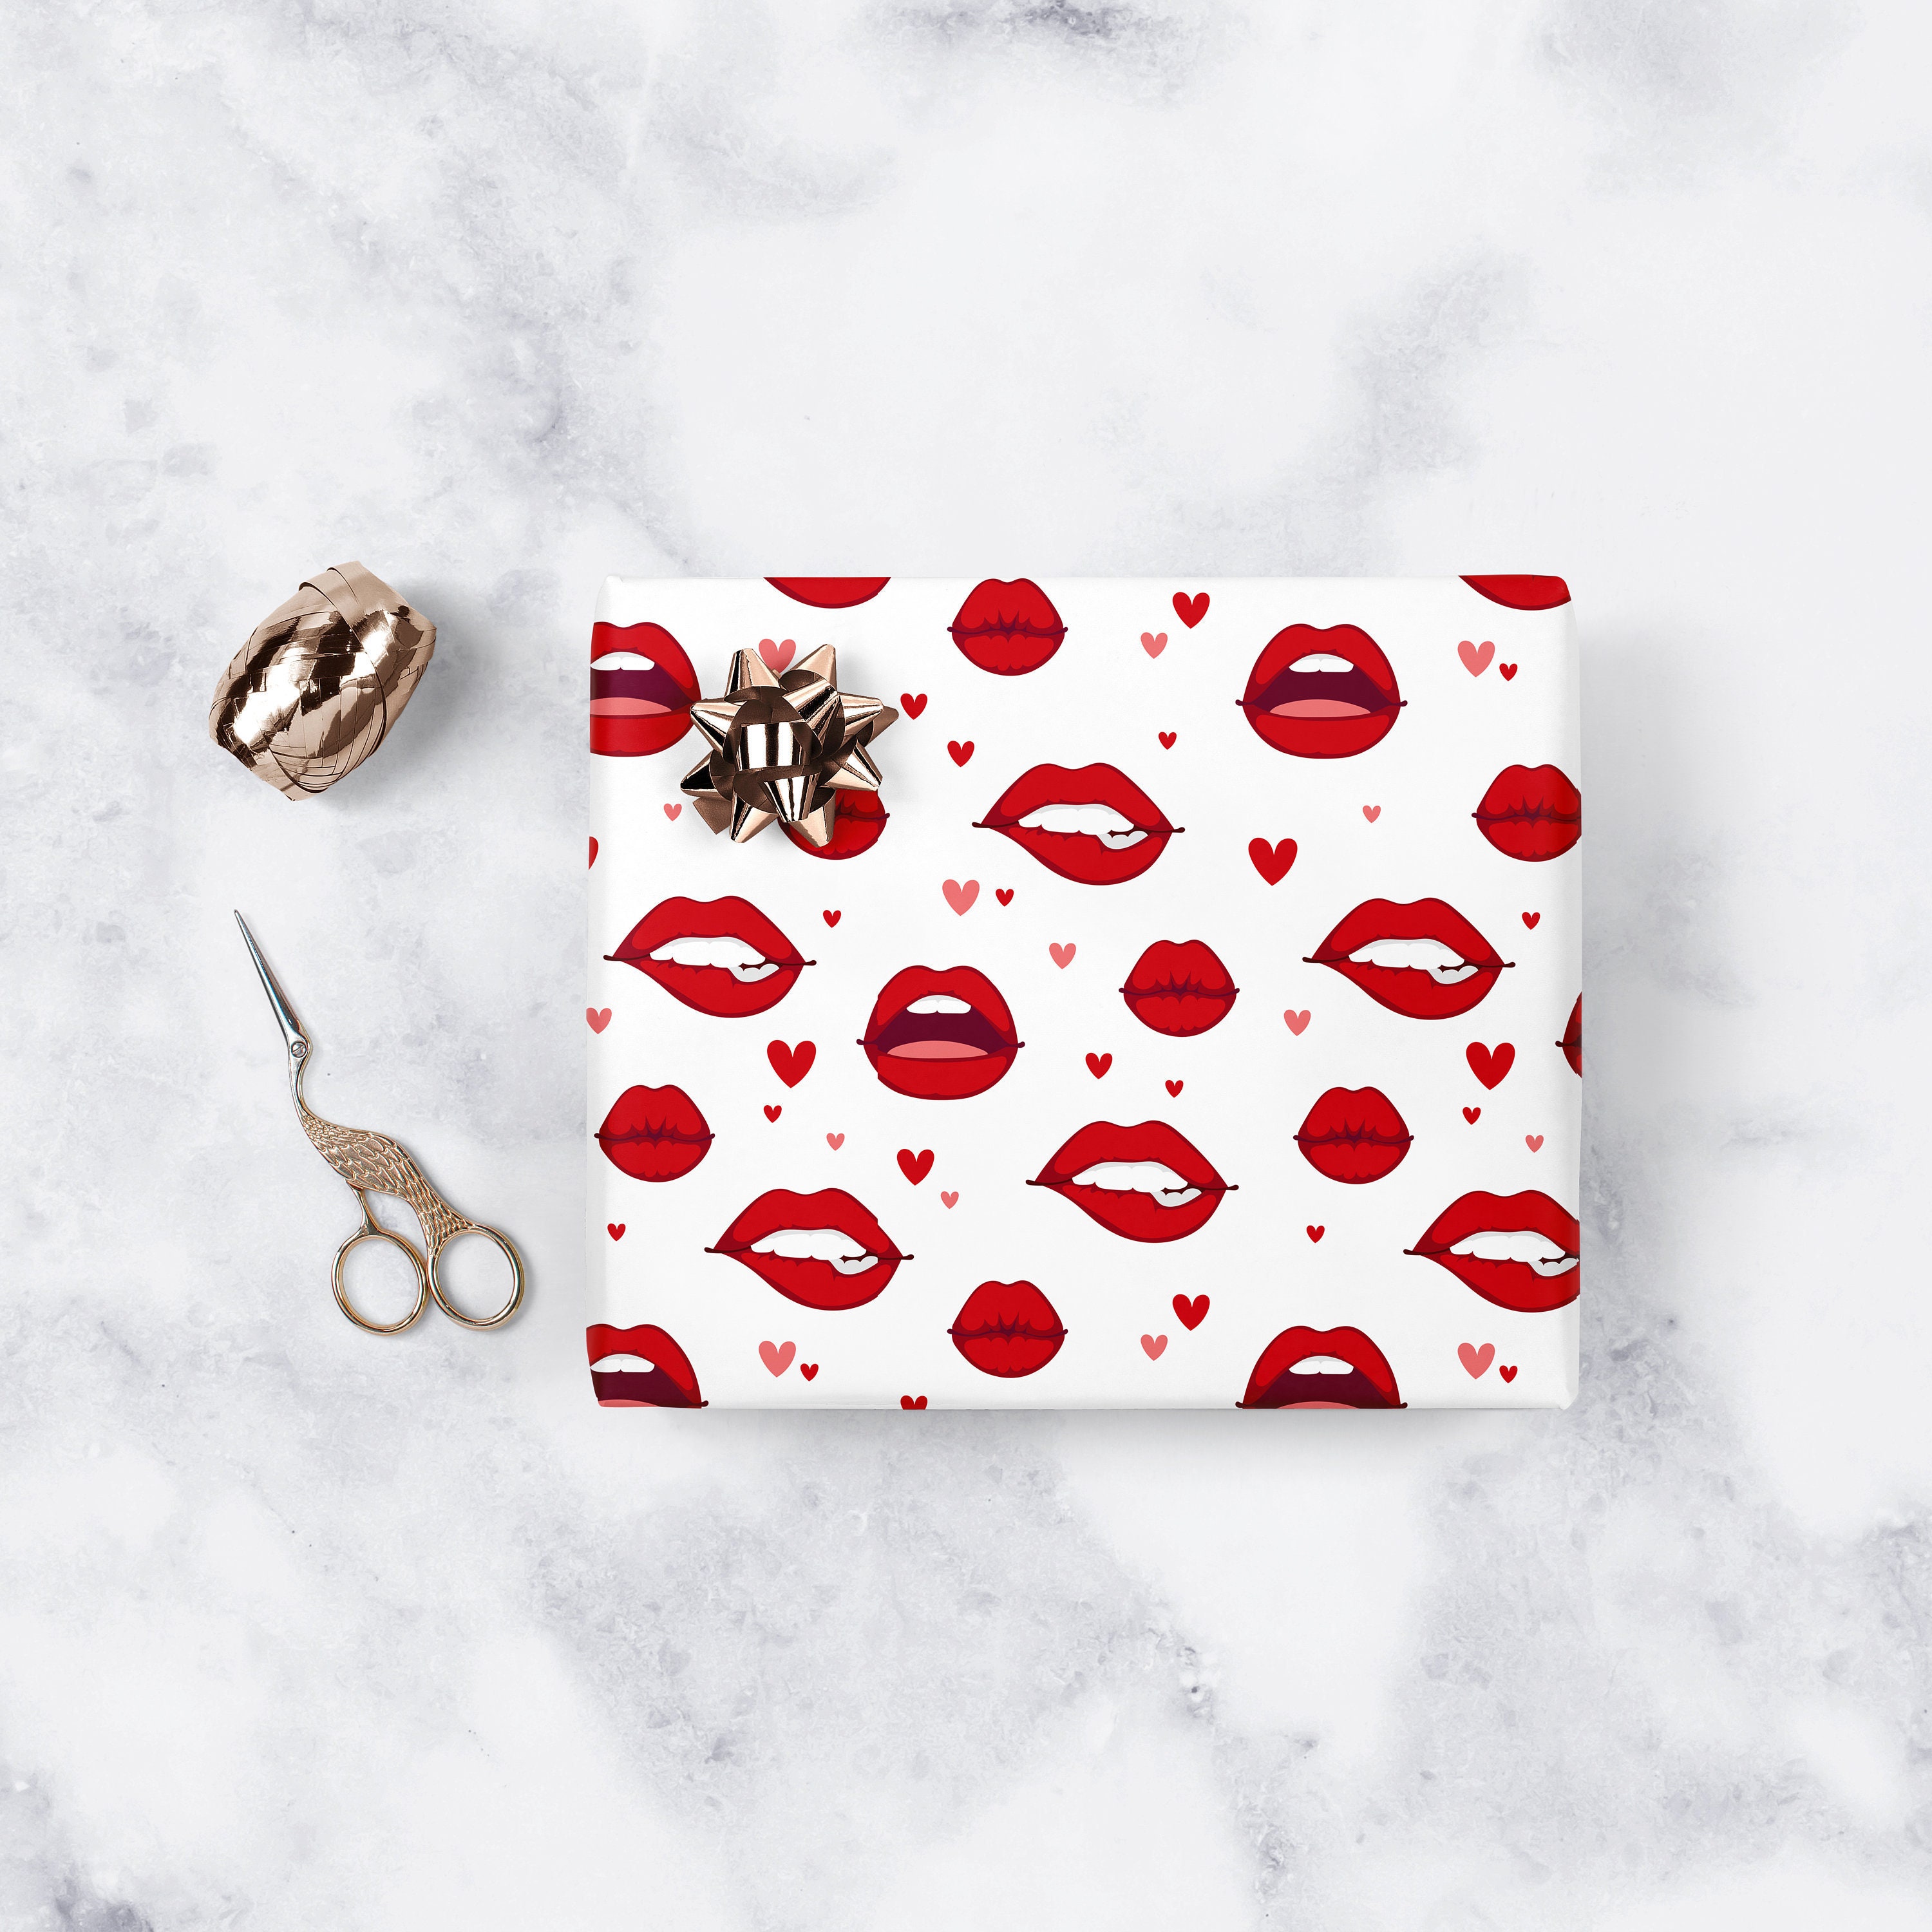  Valentines Wrapping Paper,6 Sheets 6 Designs Funny Kiss Love  Heart Gift Wrapping Paper Adult,Black Pink White Red Gift Wrap Paper Whit 2  Rolls Ribbons For Valentine's Day Wedding Birthday Holiday 